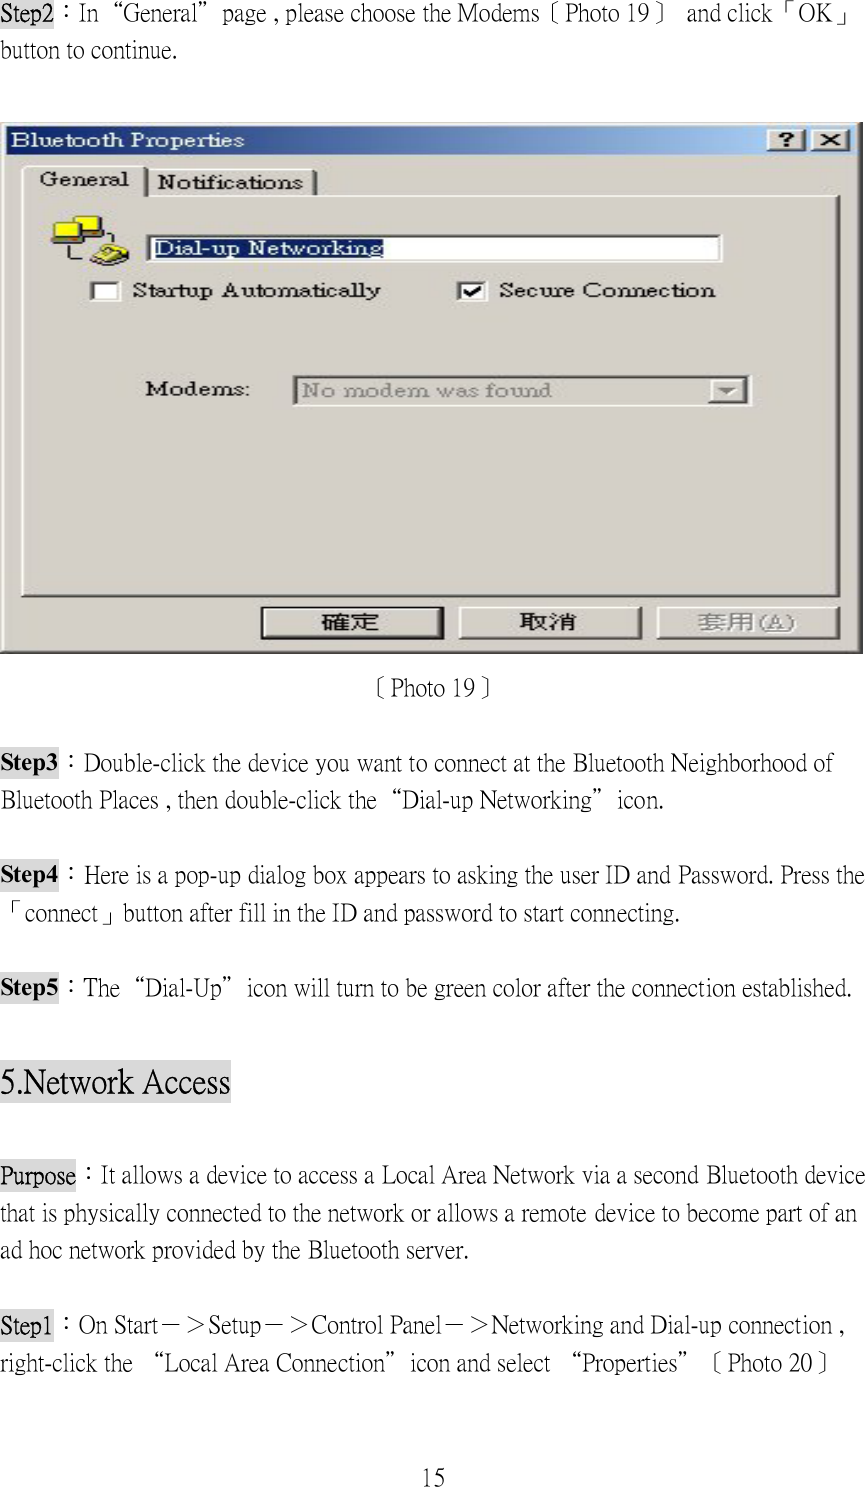 15 Step2：In“General”page , please choose the Modems〔Photo 19〕  and click「OK」button to continue.   〔Photo 19〕  Step3：Double-click the device you want to connect at the Bluetooth Neighborhood of Bluetooth Places , then double-click the“Dial-up Networking”icon.  Step4：Here is a pop-up dialog box appears to asking the user ID and Password. Press the 「connect」button after fill in the ID and password to start connecting.    Step5：The“Dial-Up”icon will turn to be green color after the connection established.    5.Network Access  Purpose：It allows a device to access a Local Area Network via a second Bluetooth device that is physically connected to the network or allows a remote device to become part of an ad hoc network provided by the Bluetooth server.  Step1：On Start－＞Setup－＞Control Panel－＞Networking and Dial-up connection , right-click the “Local Area Connection”icon and select “Properties”〔Photo 20〕 